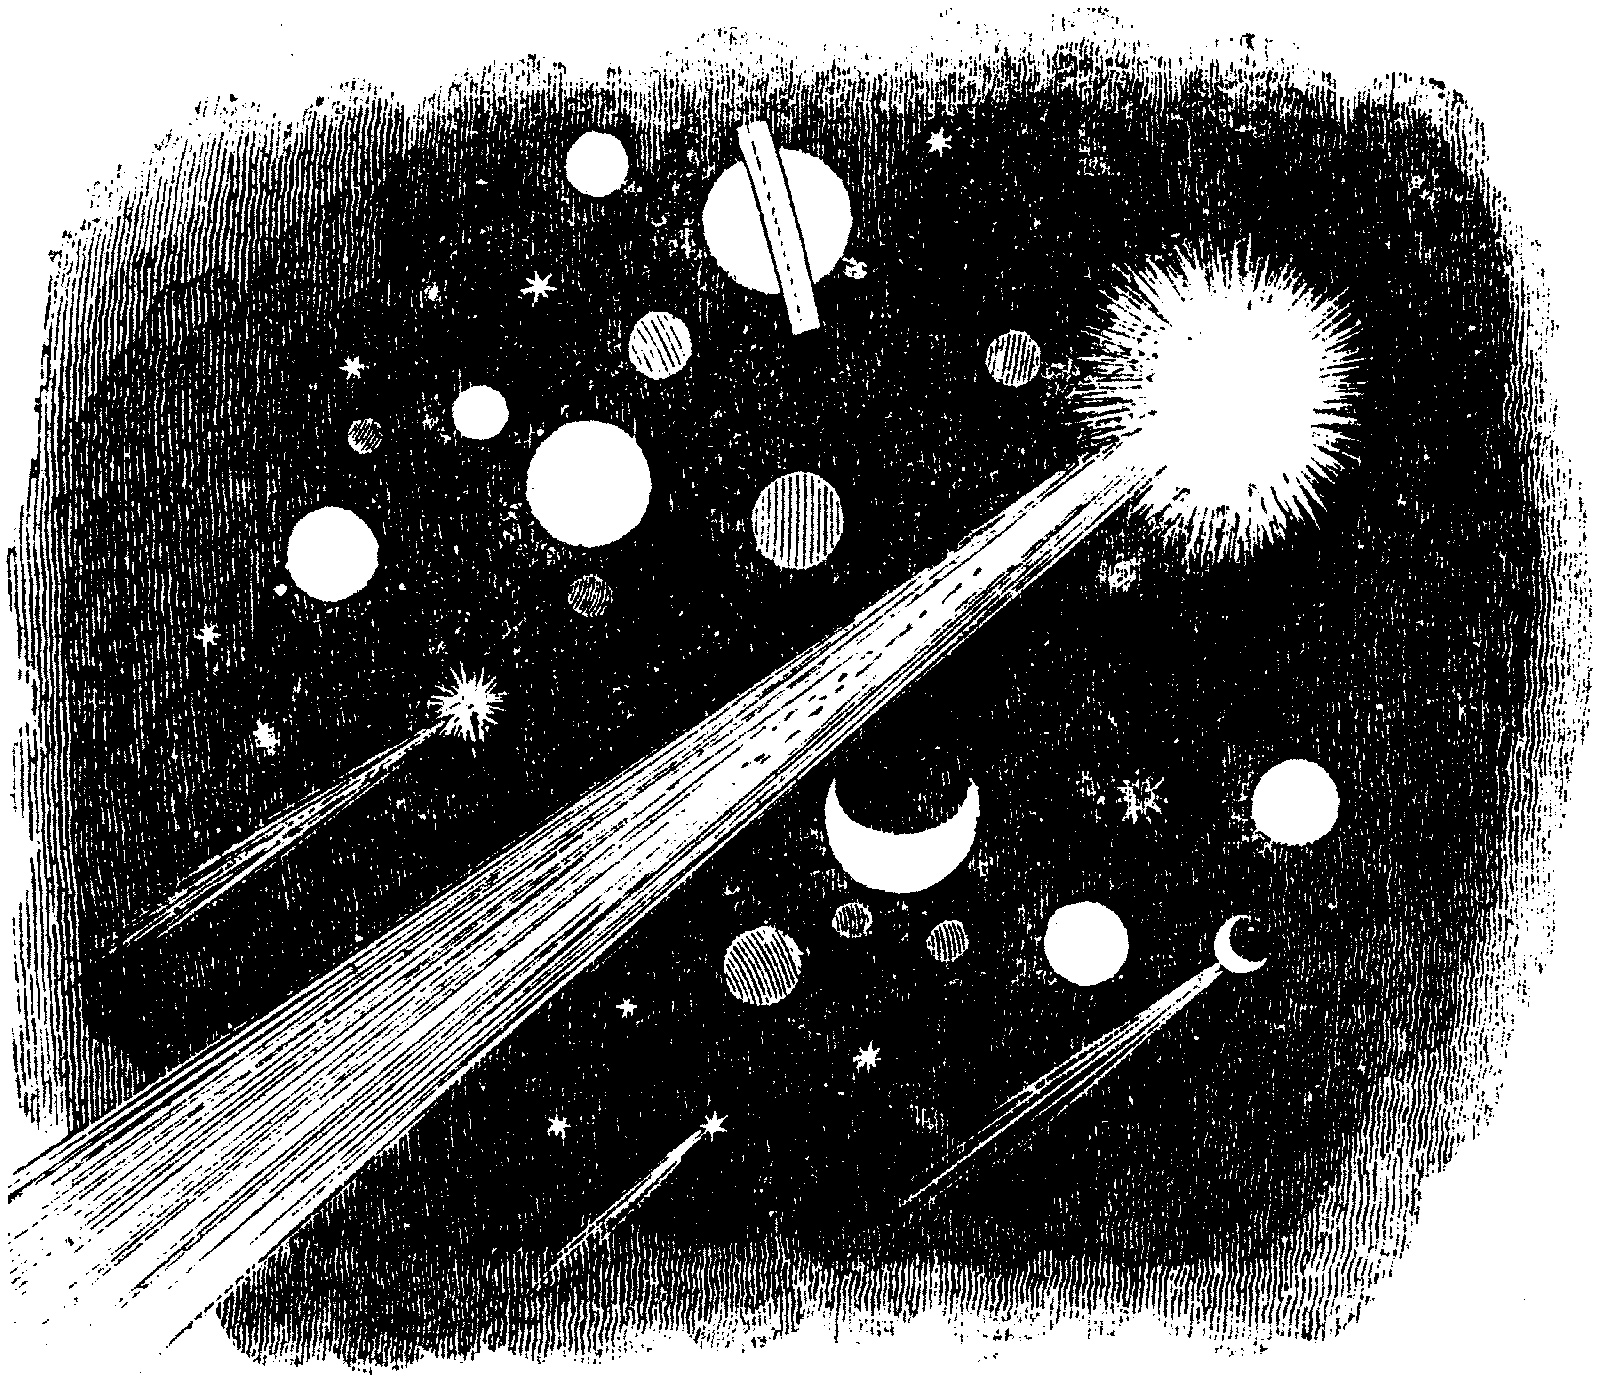 ‘The Planets’; nineteenth-century engraving by J.J. Grandville